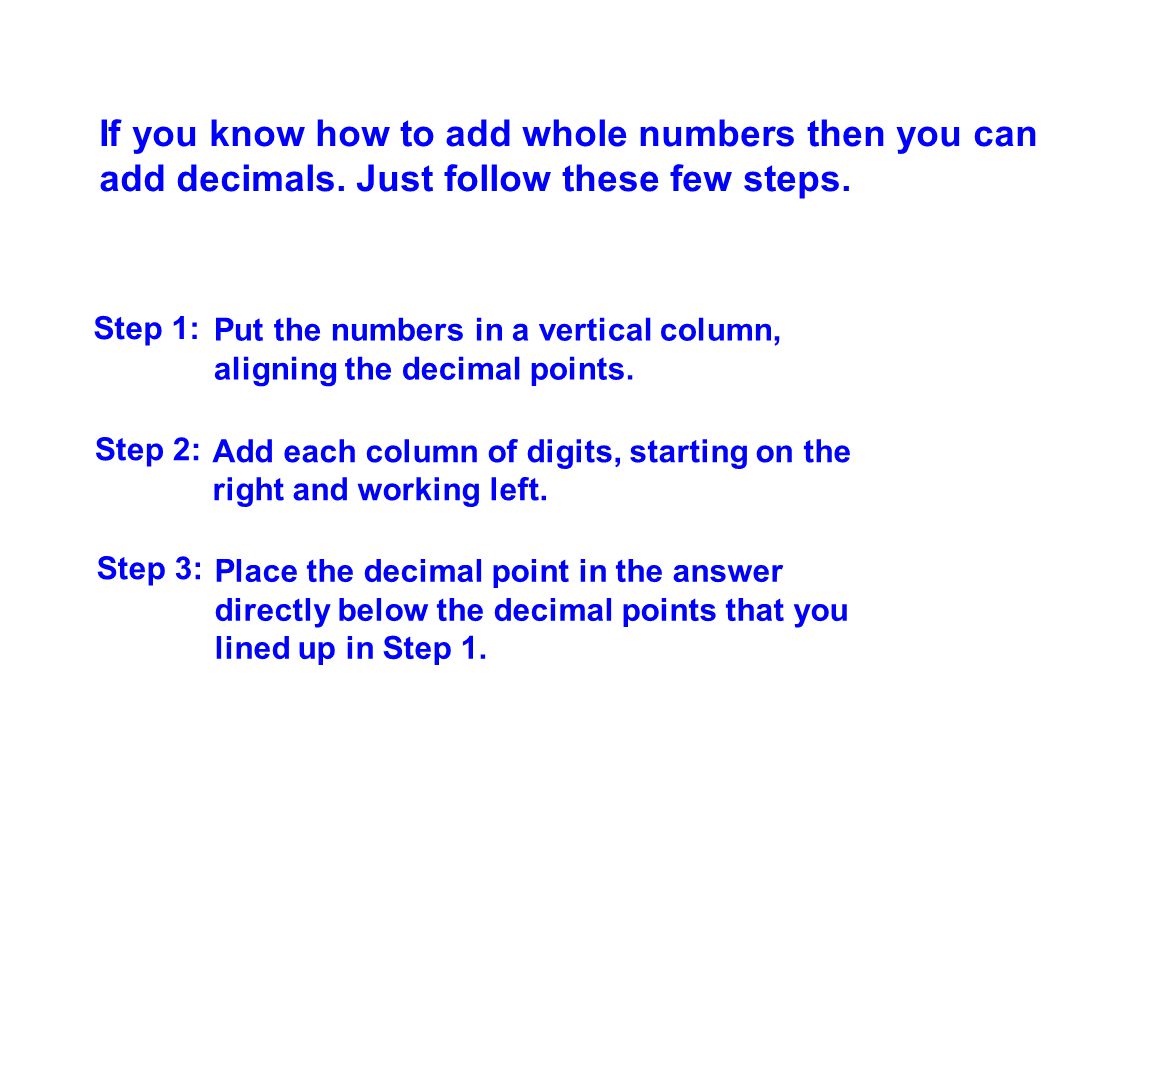 If you know how to add whole numbers then you can add decimals.